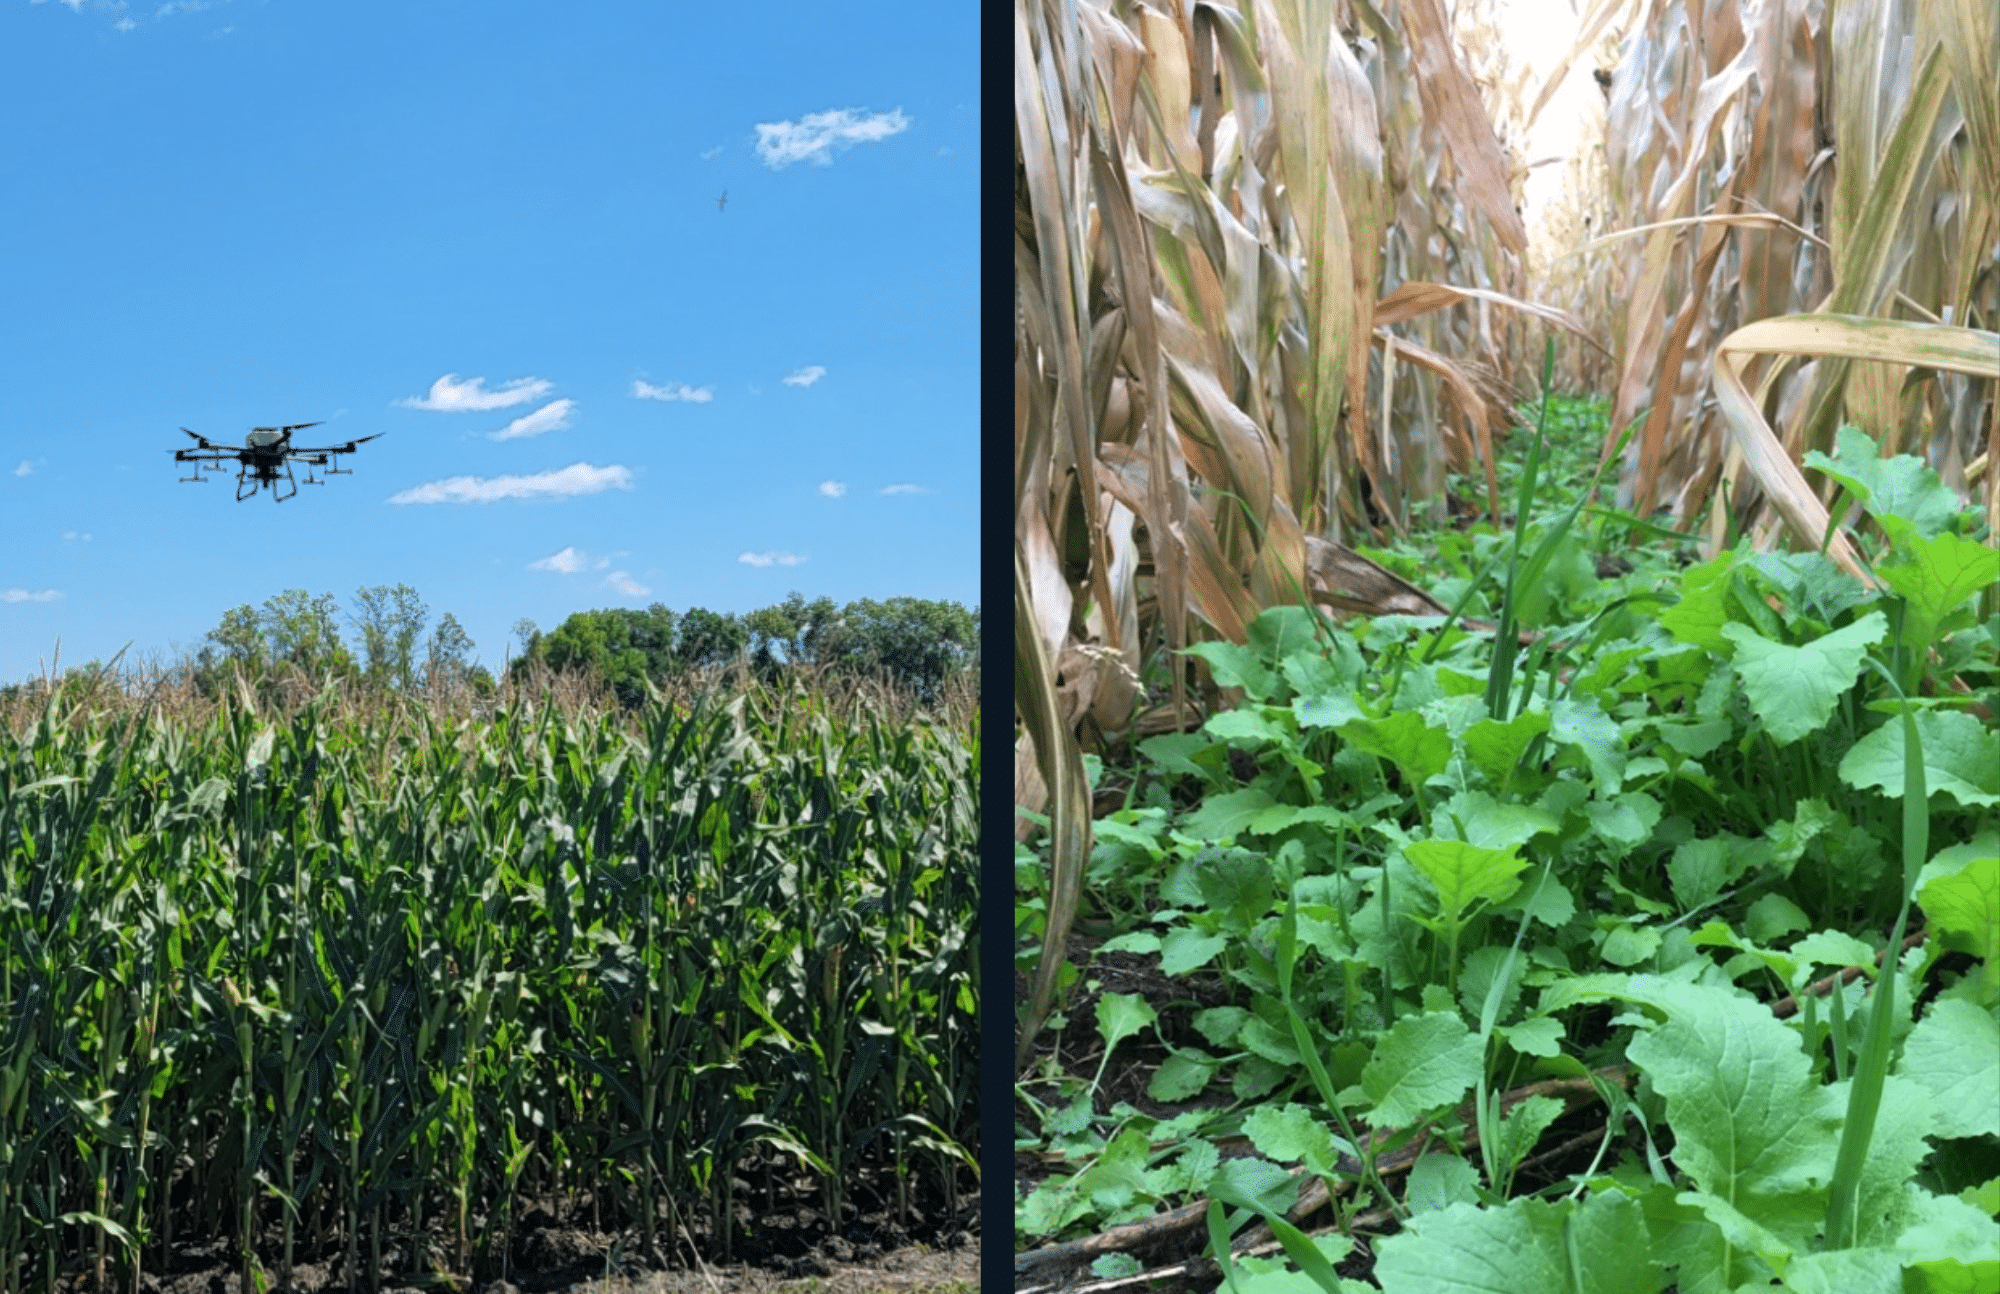 Photo shows before and after a drone planting cover crops into a standing corn field